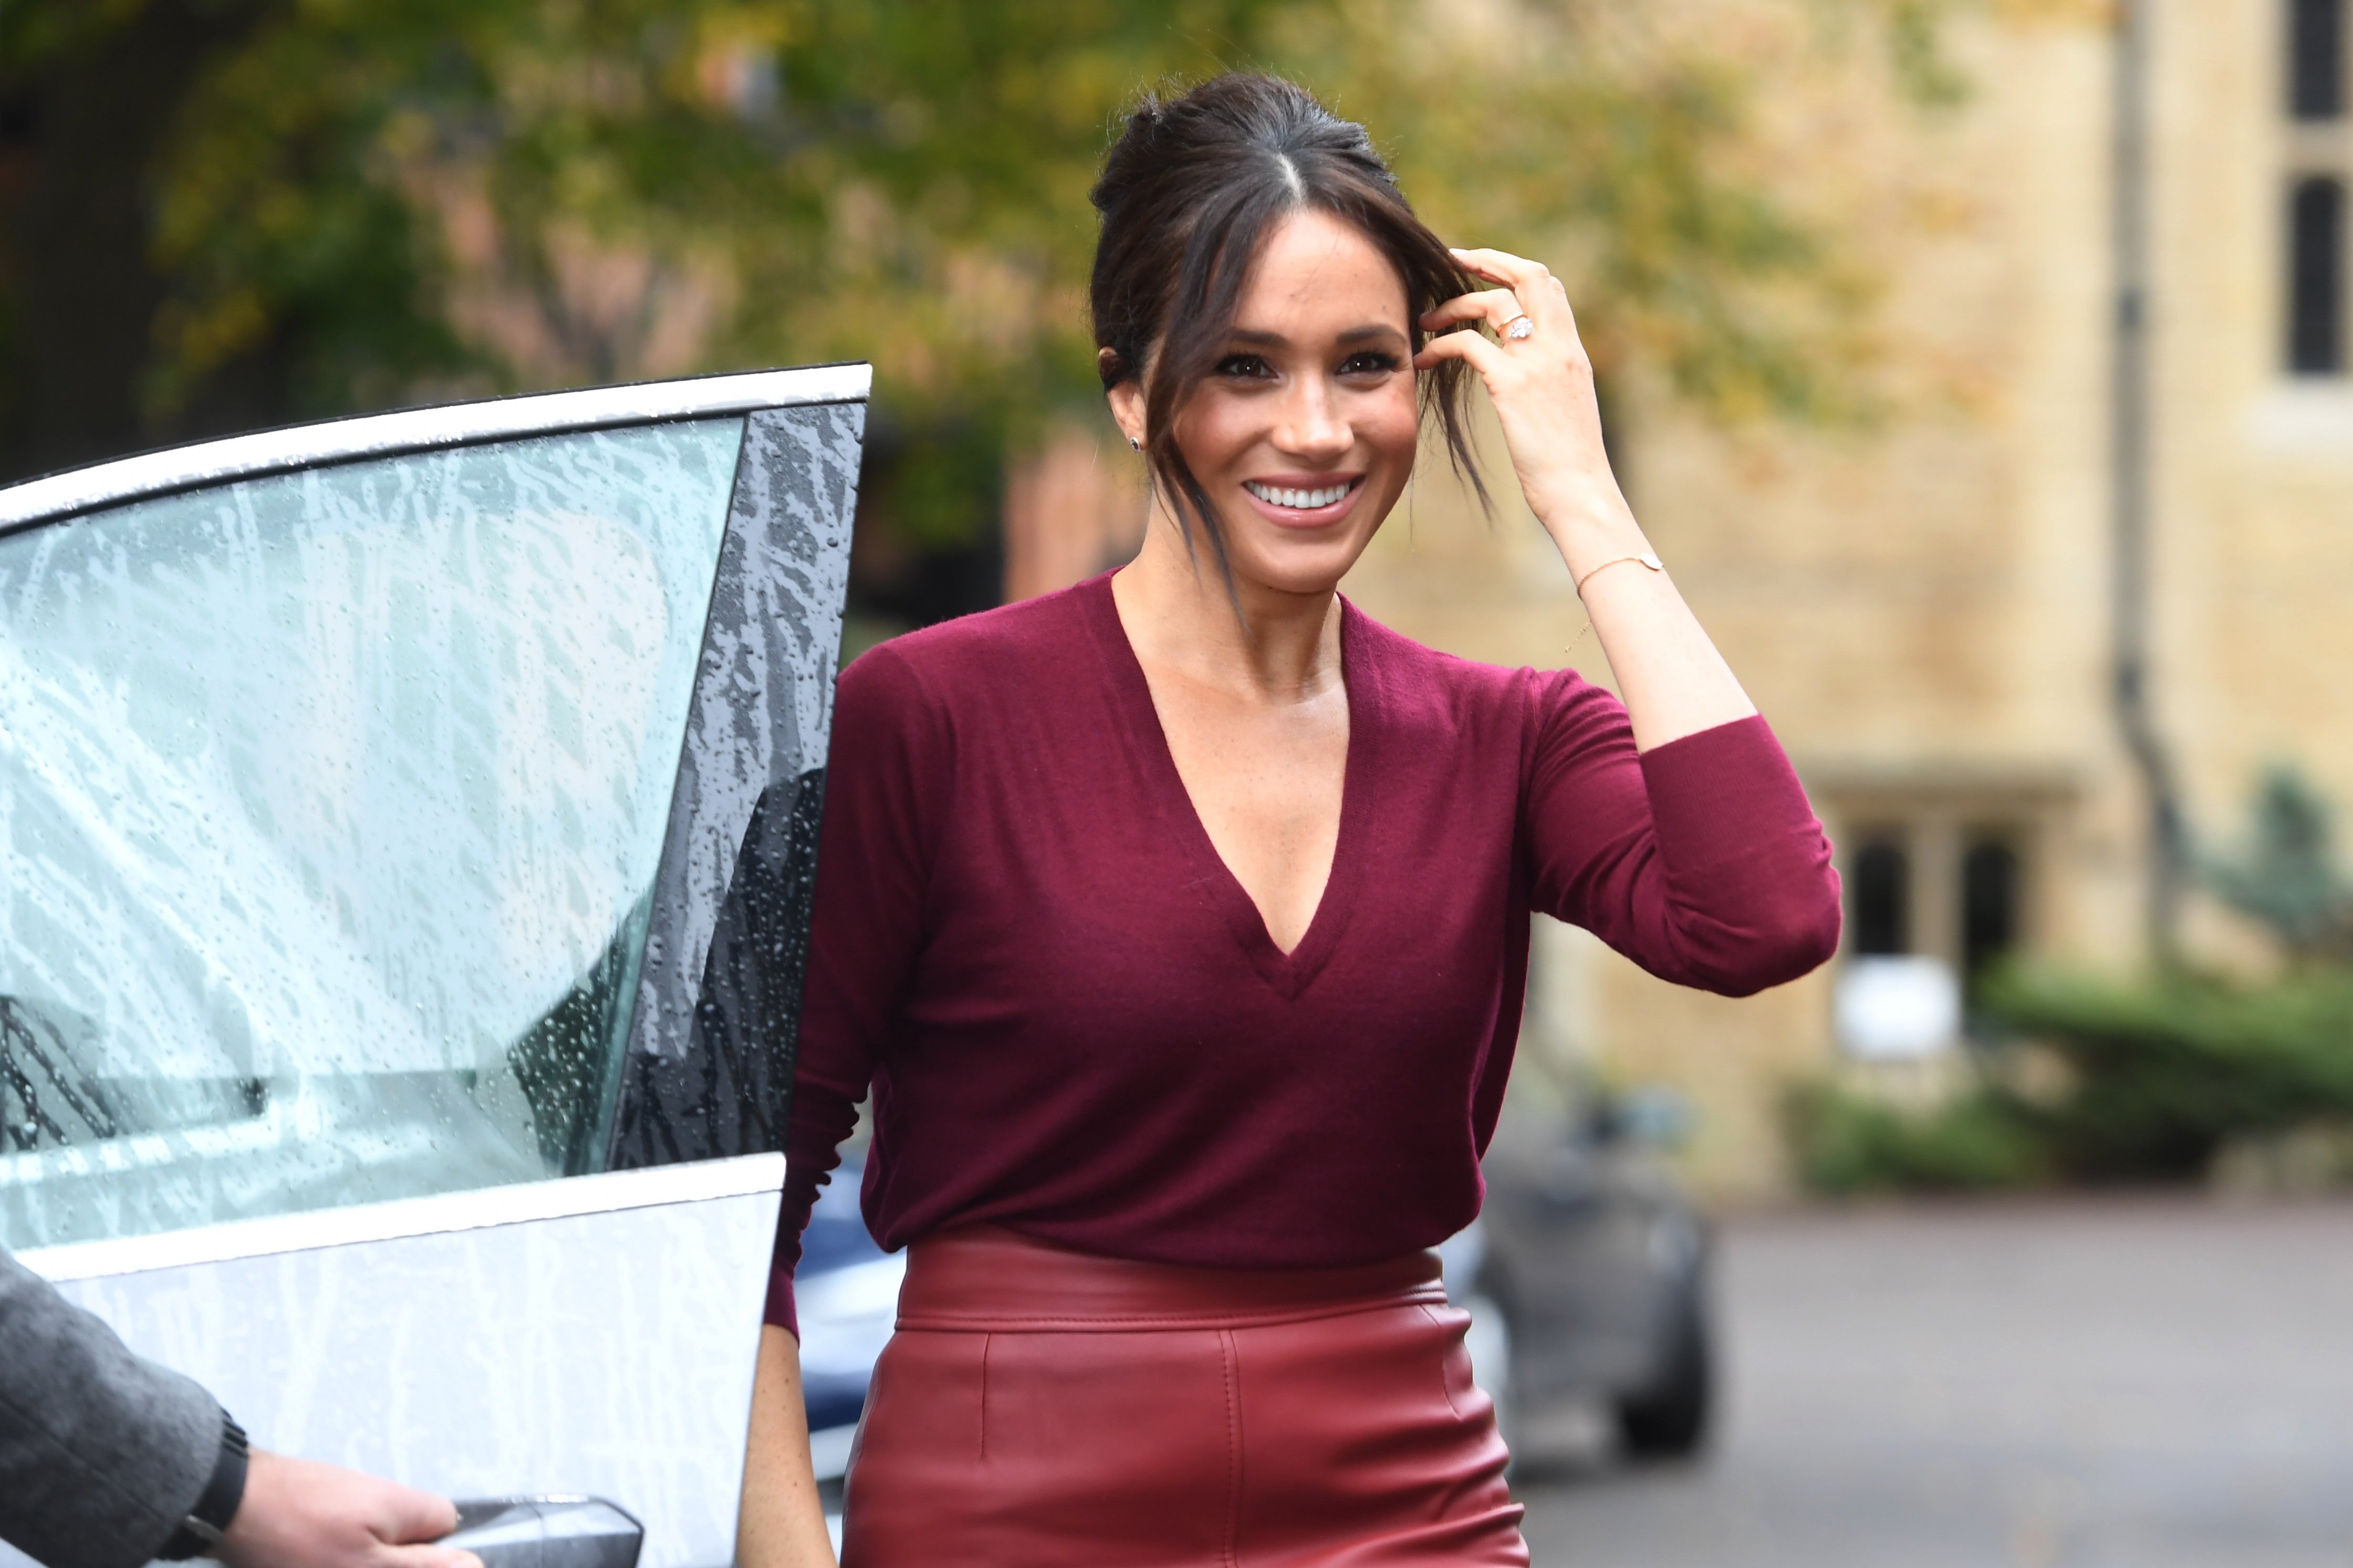 Meghan Markle attends a roundtable discussion on gender equality with The Queens Commonwealth Trust (QCT) and One Young World at Windsor Castle on October 25, 2019 | Source: Getty Images